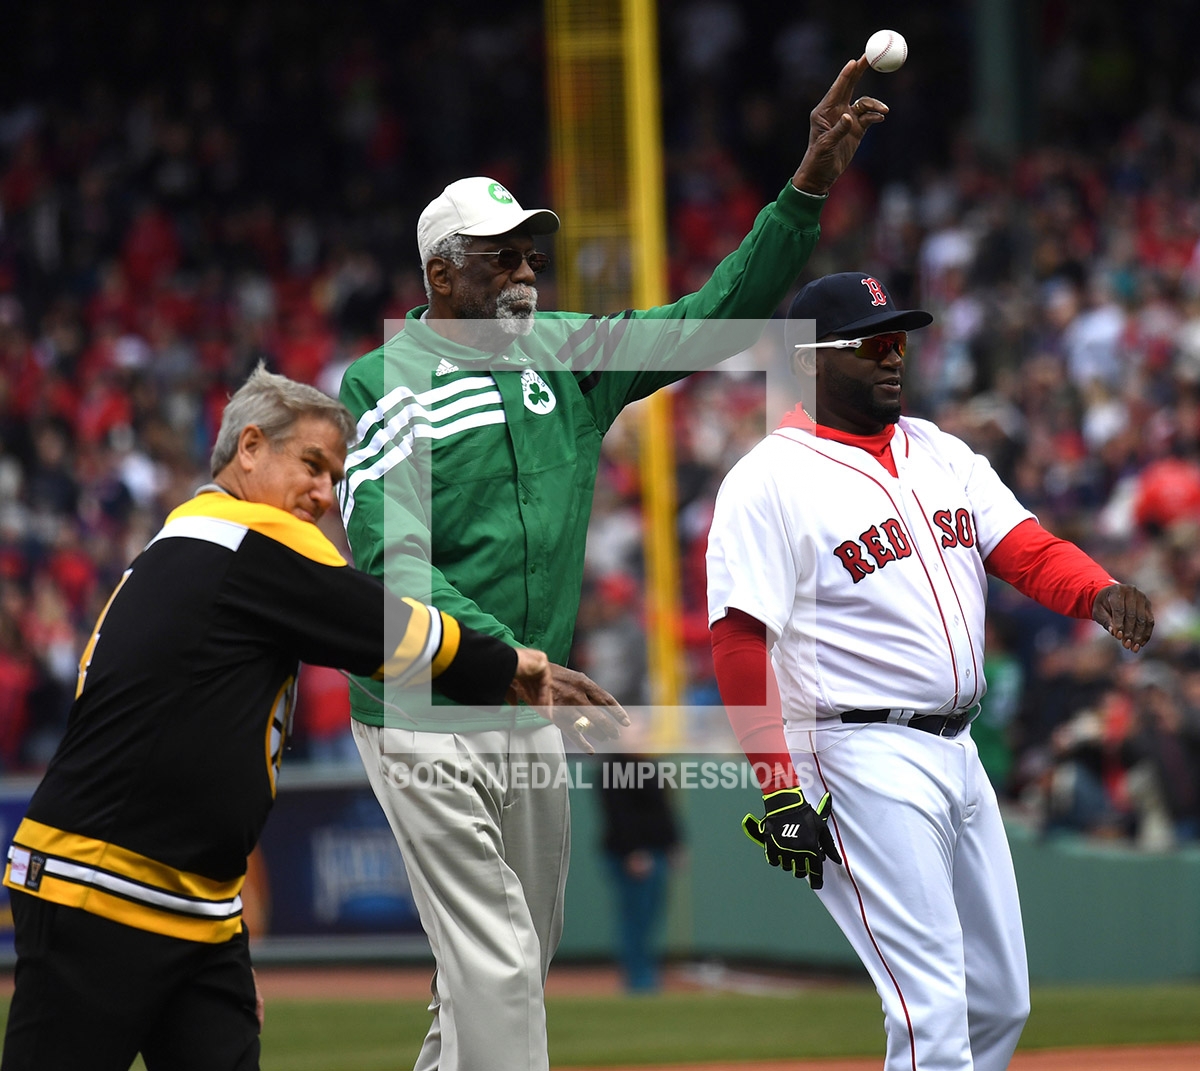 Three Boston Sport Icons, BOBBY ORR, BILL RUSSELL, and DAVID ORTIZ throw out the first ceremonial pitch at the Red Sox home opener at Fenway Park. Unfortunately, the Red Sox lost their opener 9-7 to the Baltimore Orioles who have started the season 6-0, the best start in their franchise history.